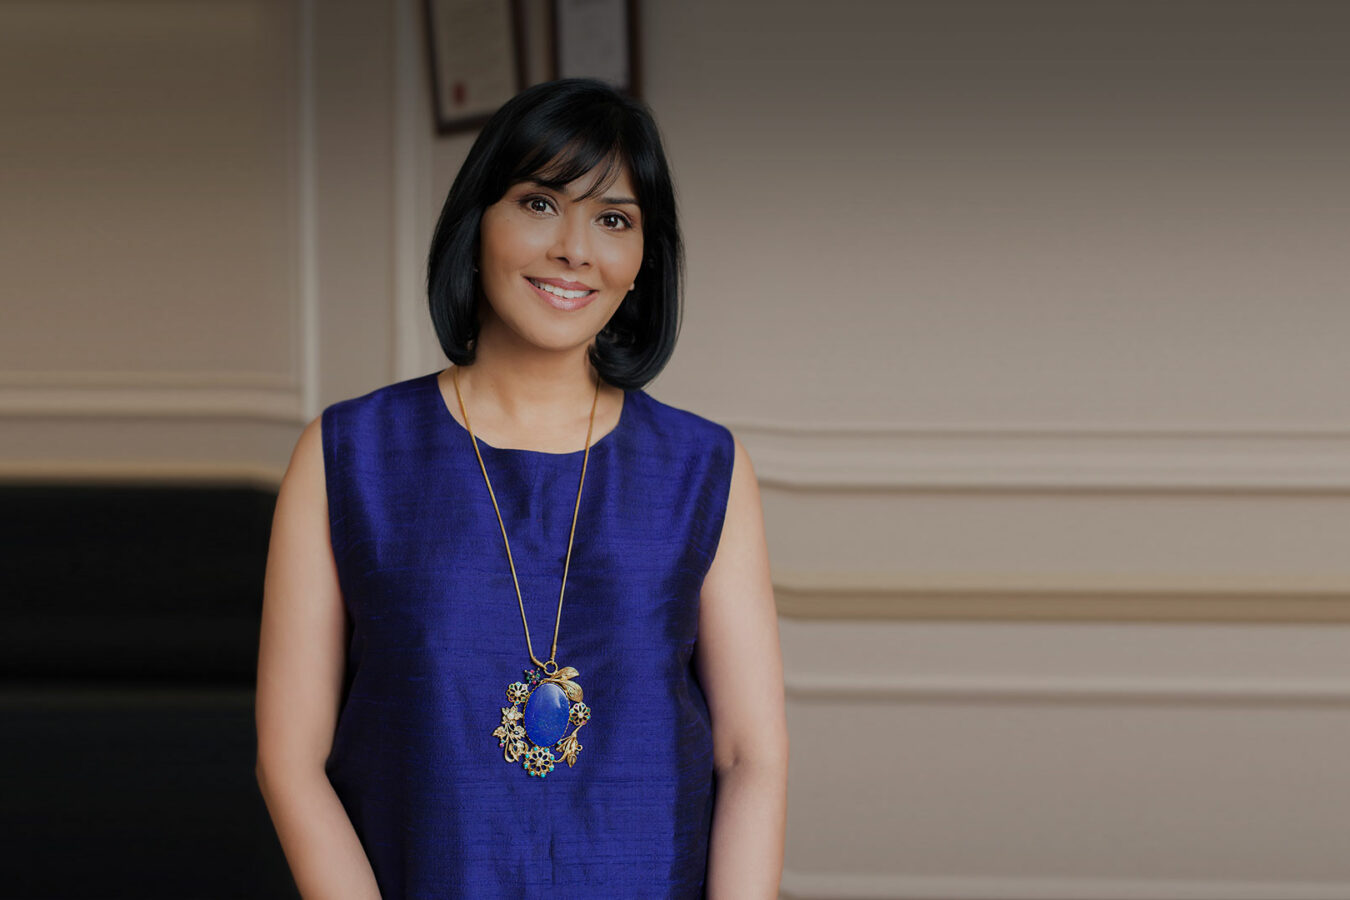 Perfect Eyes - We check in with Dr Sabrina Shah-Desai